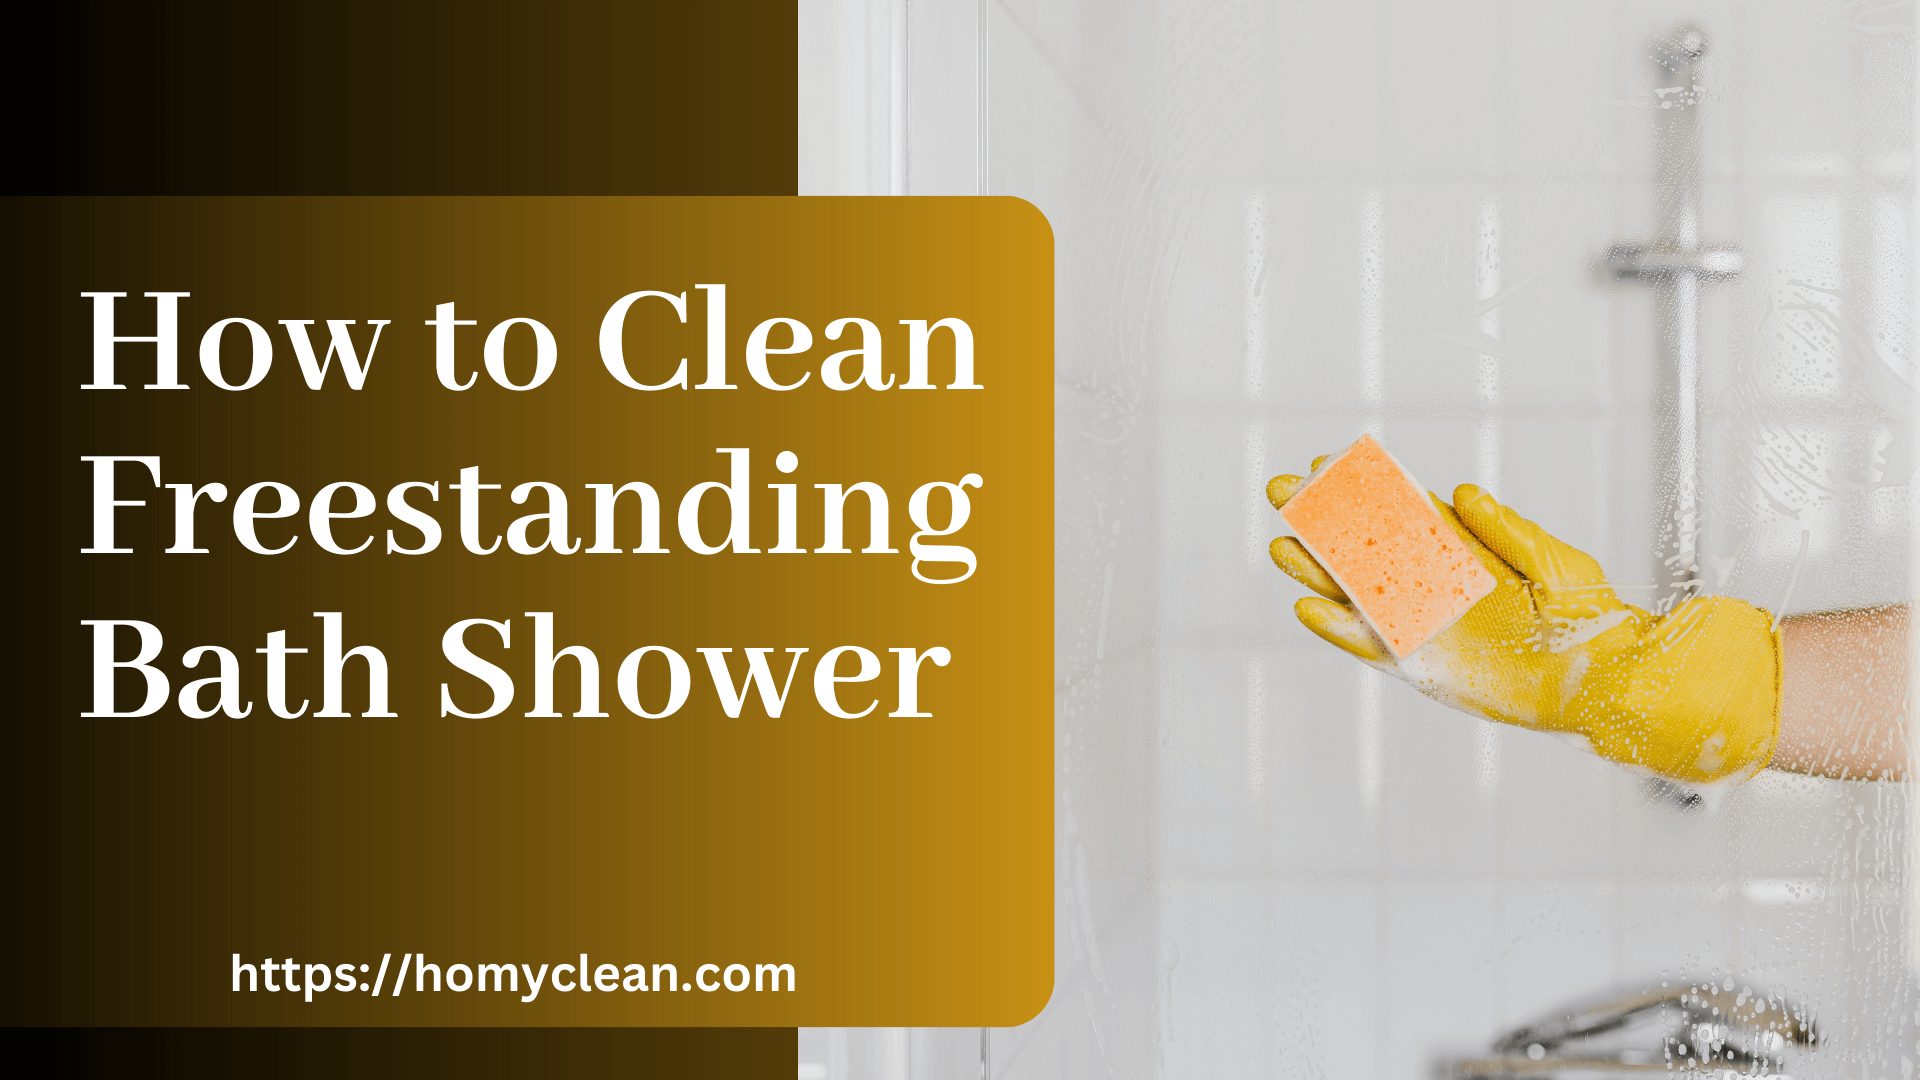 How to Clean Freestanding Bath Shower